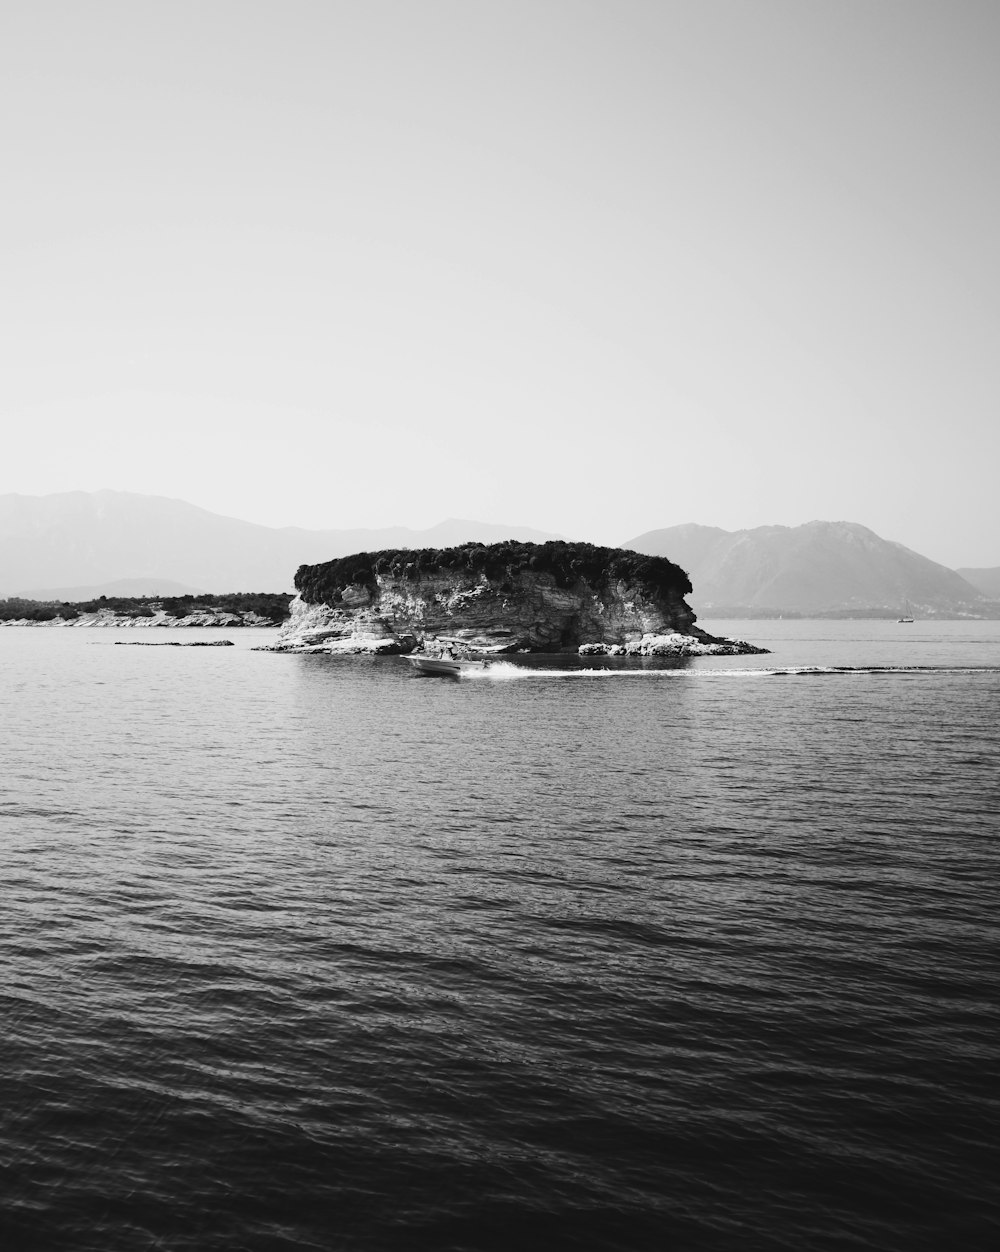 grayscale photography of boat near island during daytime